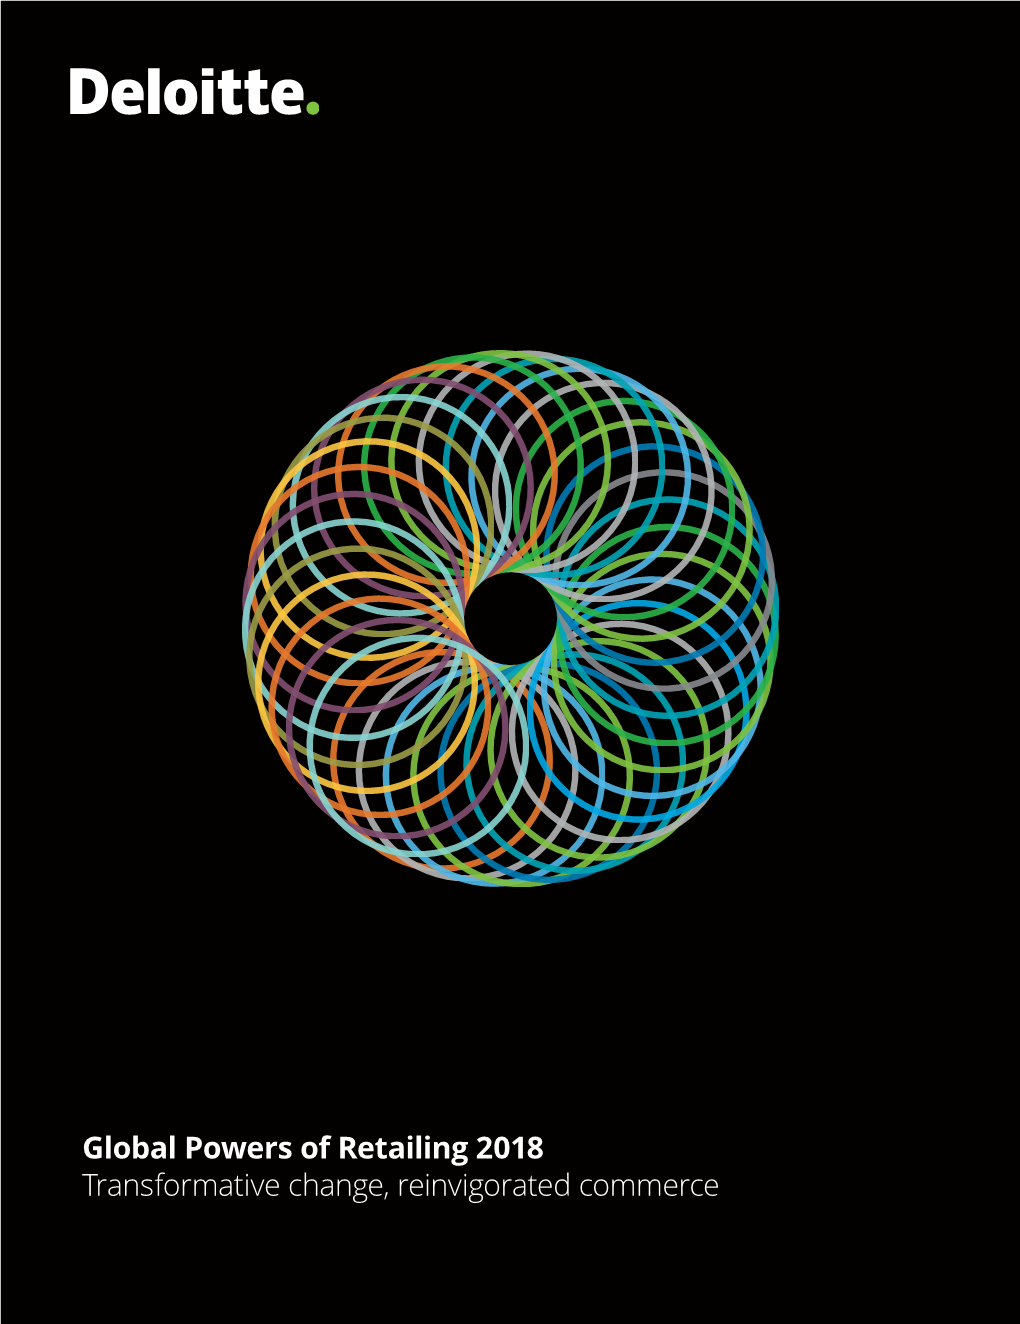 Global Powers of Retailing 2018 Transformative Change, Reinvigorated Commerce Contents